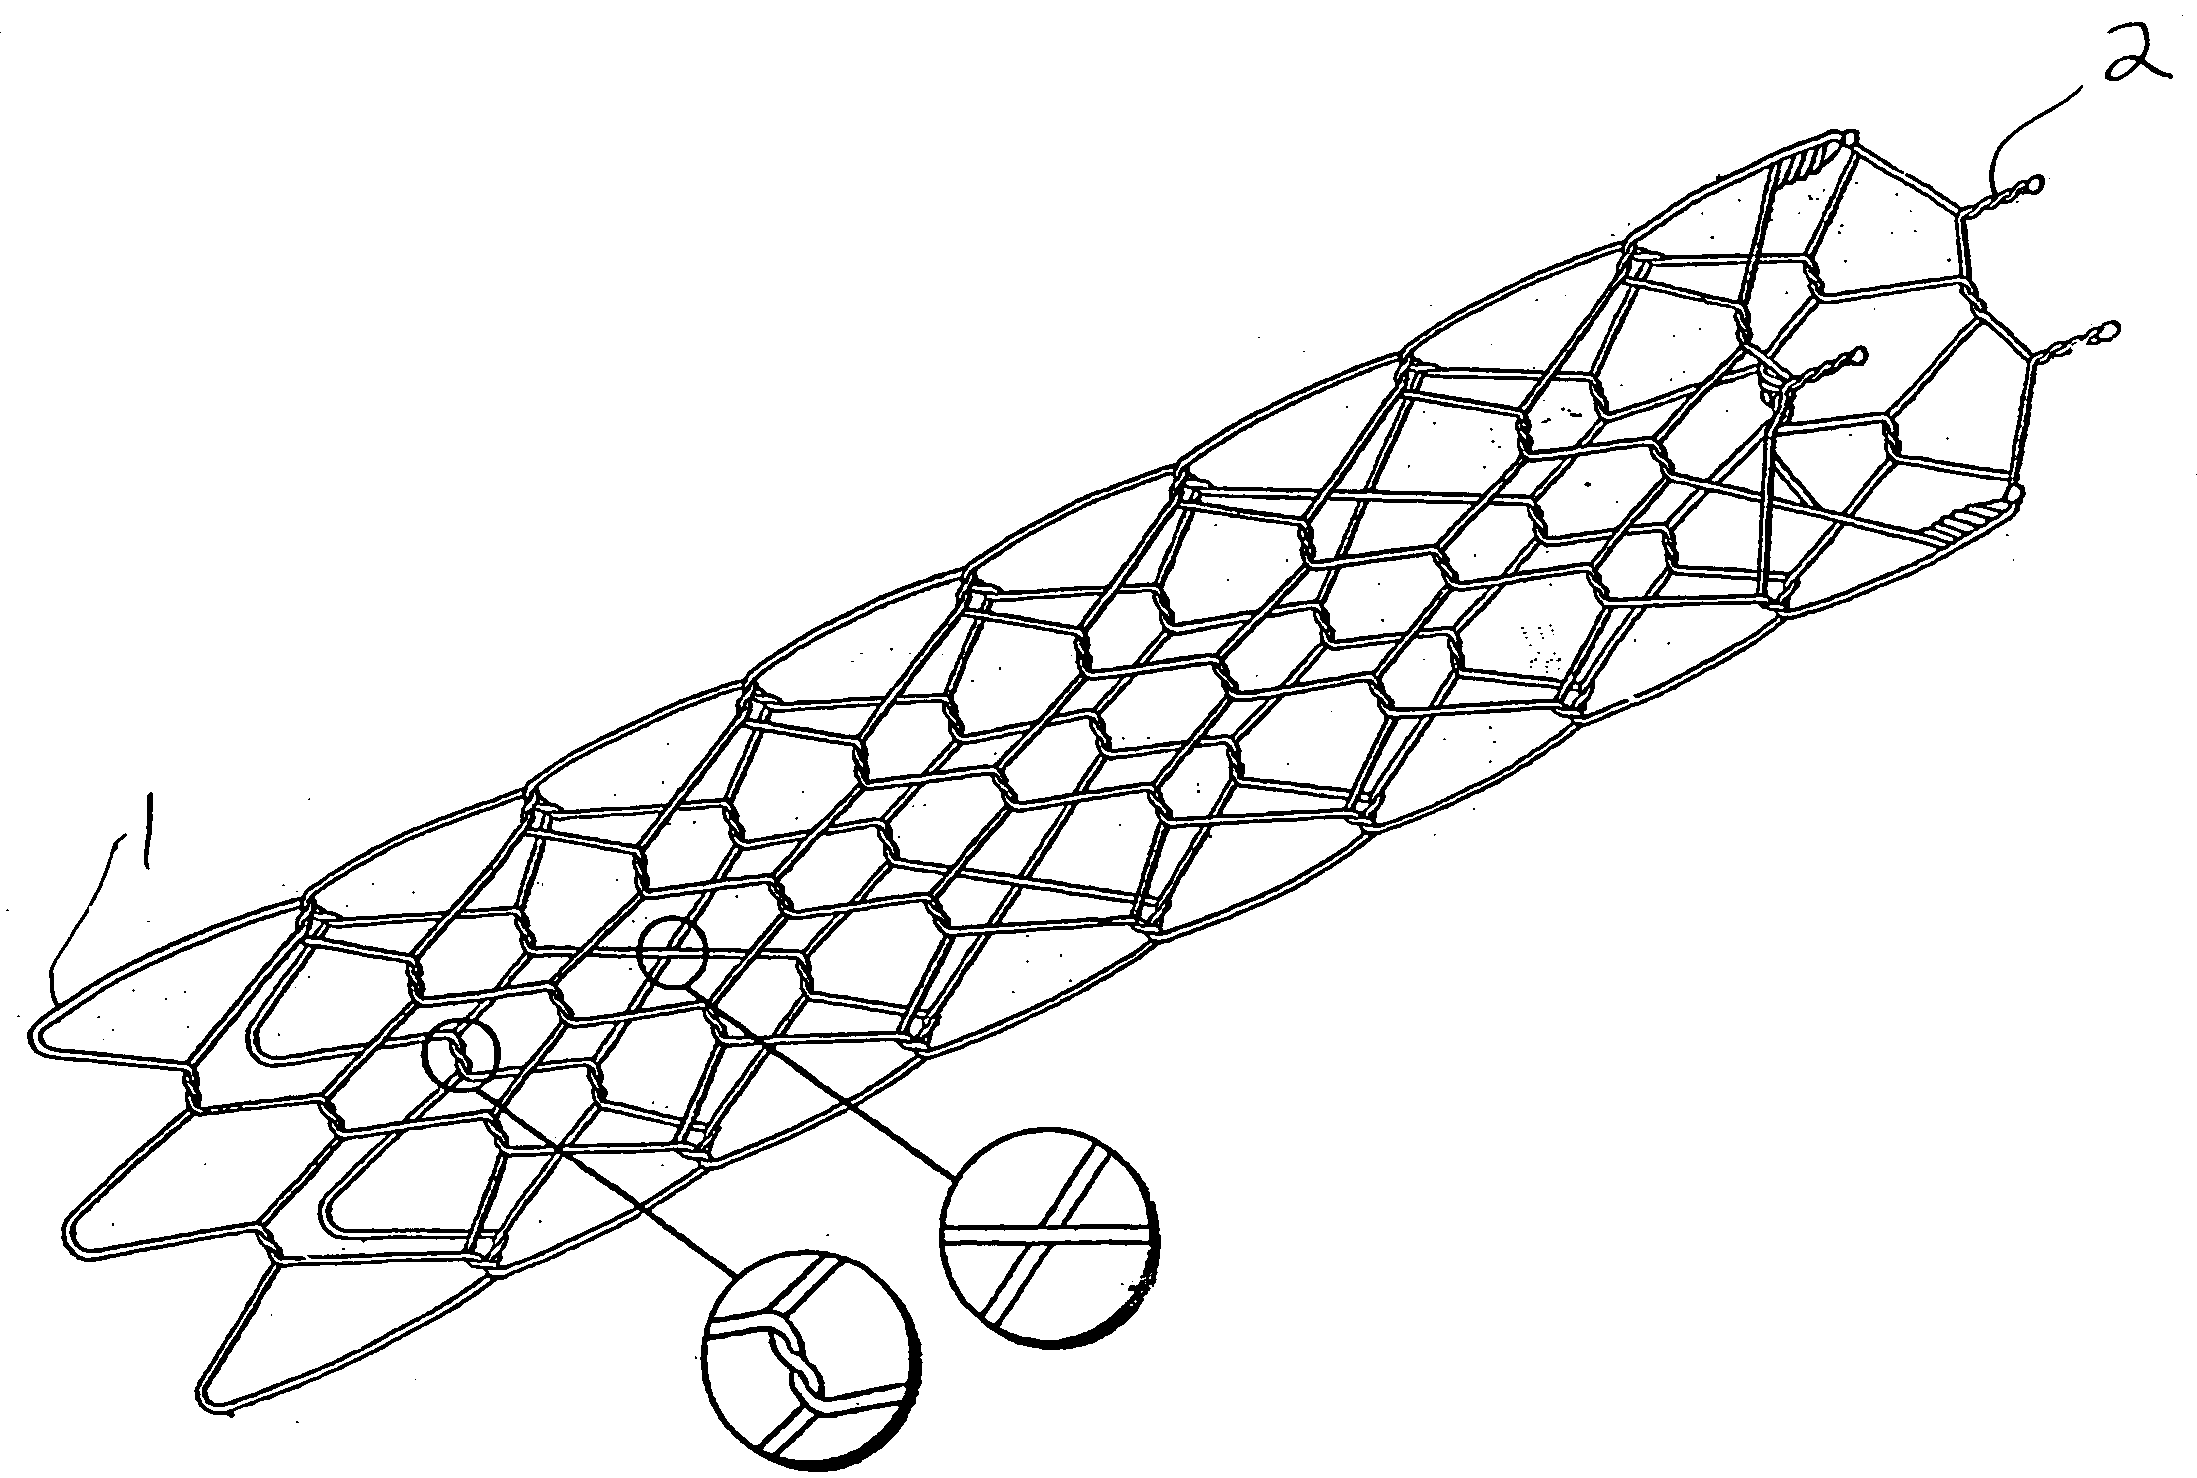 Stents with attached looped ends